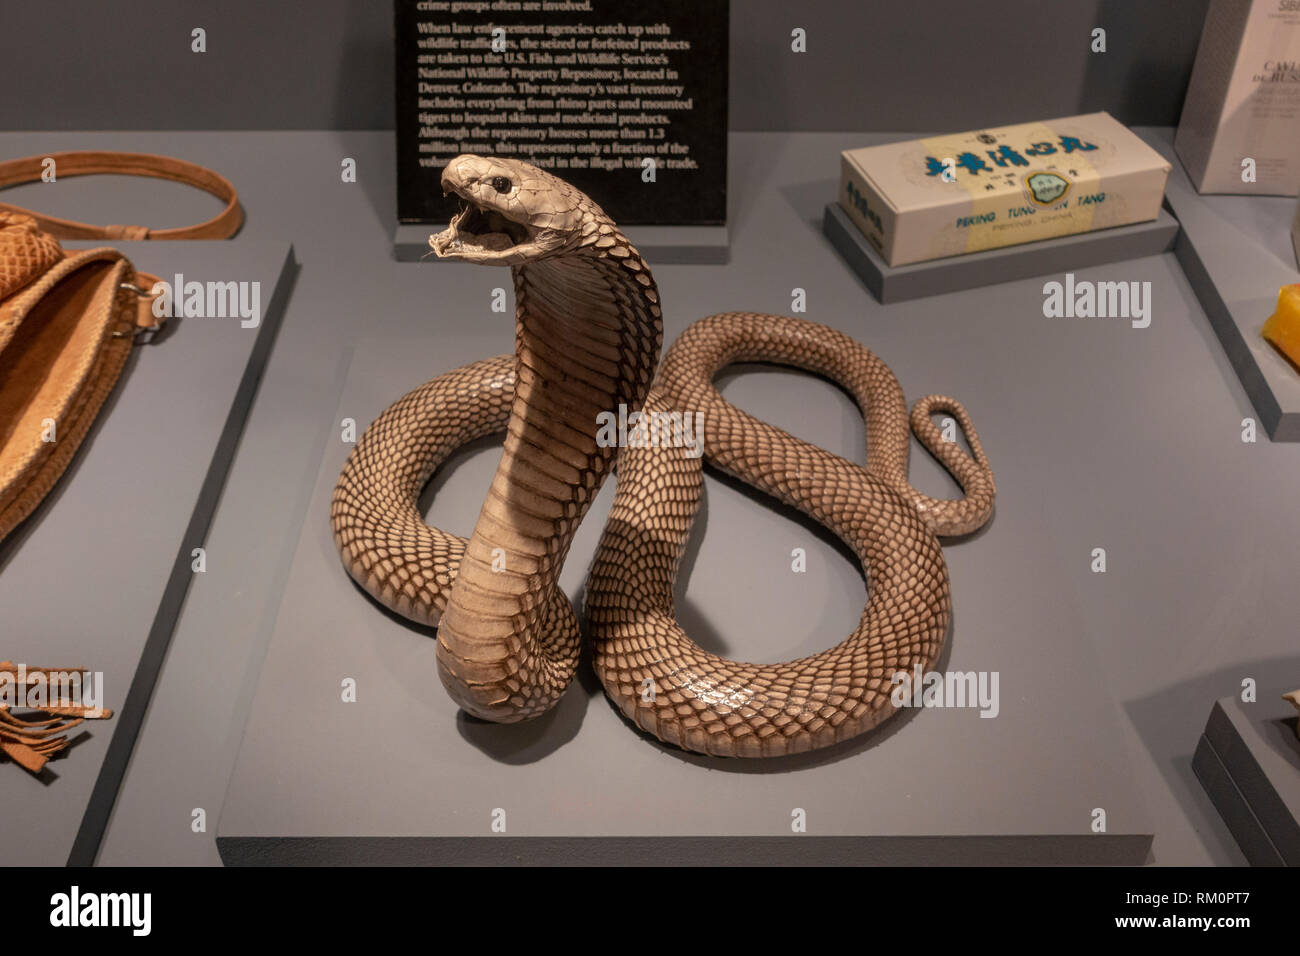 A mounted Cobra, part of the illegal wildlife trade carried out by the Mob, The Mob Museum, Las Vegas, Nevada, United States. Stock Photo